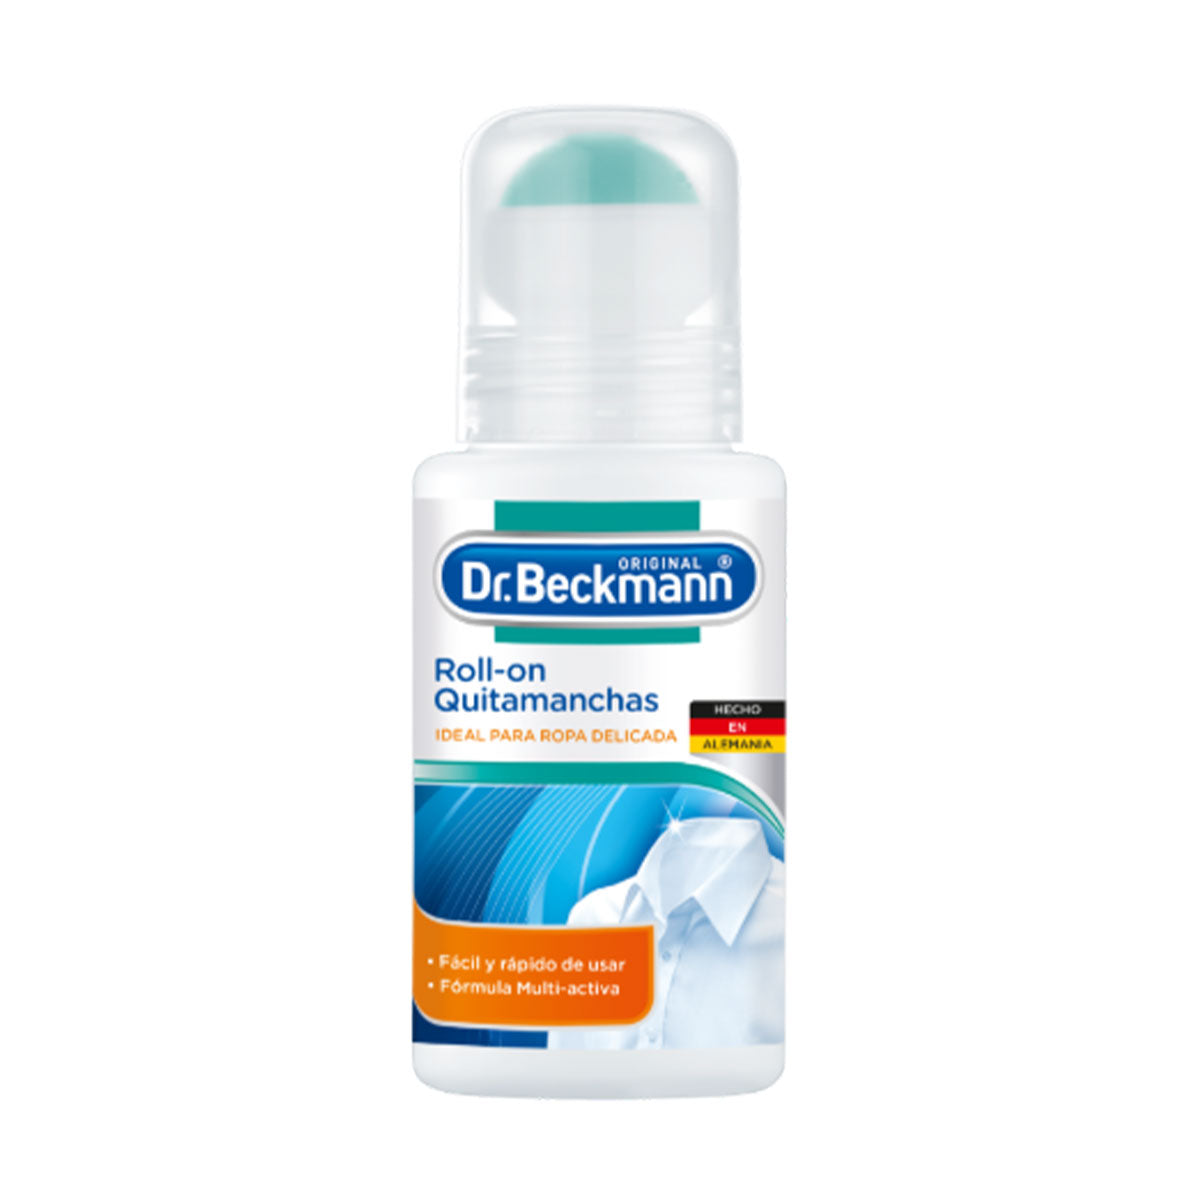 Roll on Removedor de Manchas para Ropa 75 ml Dr. Beckmann. Producto Alemán Sustentable